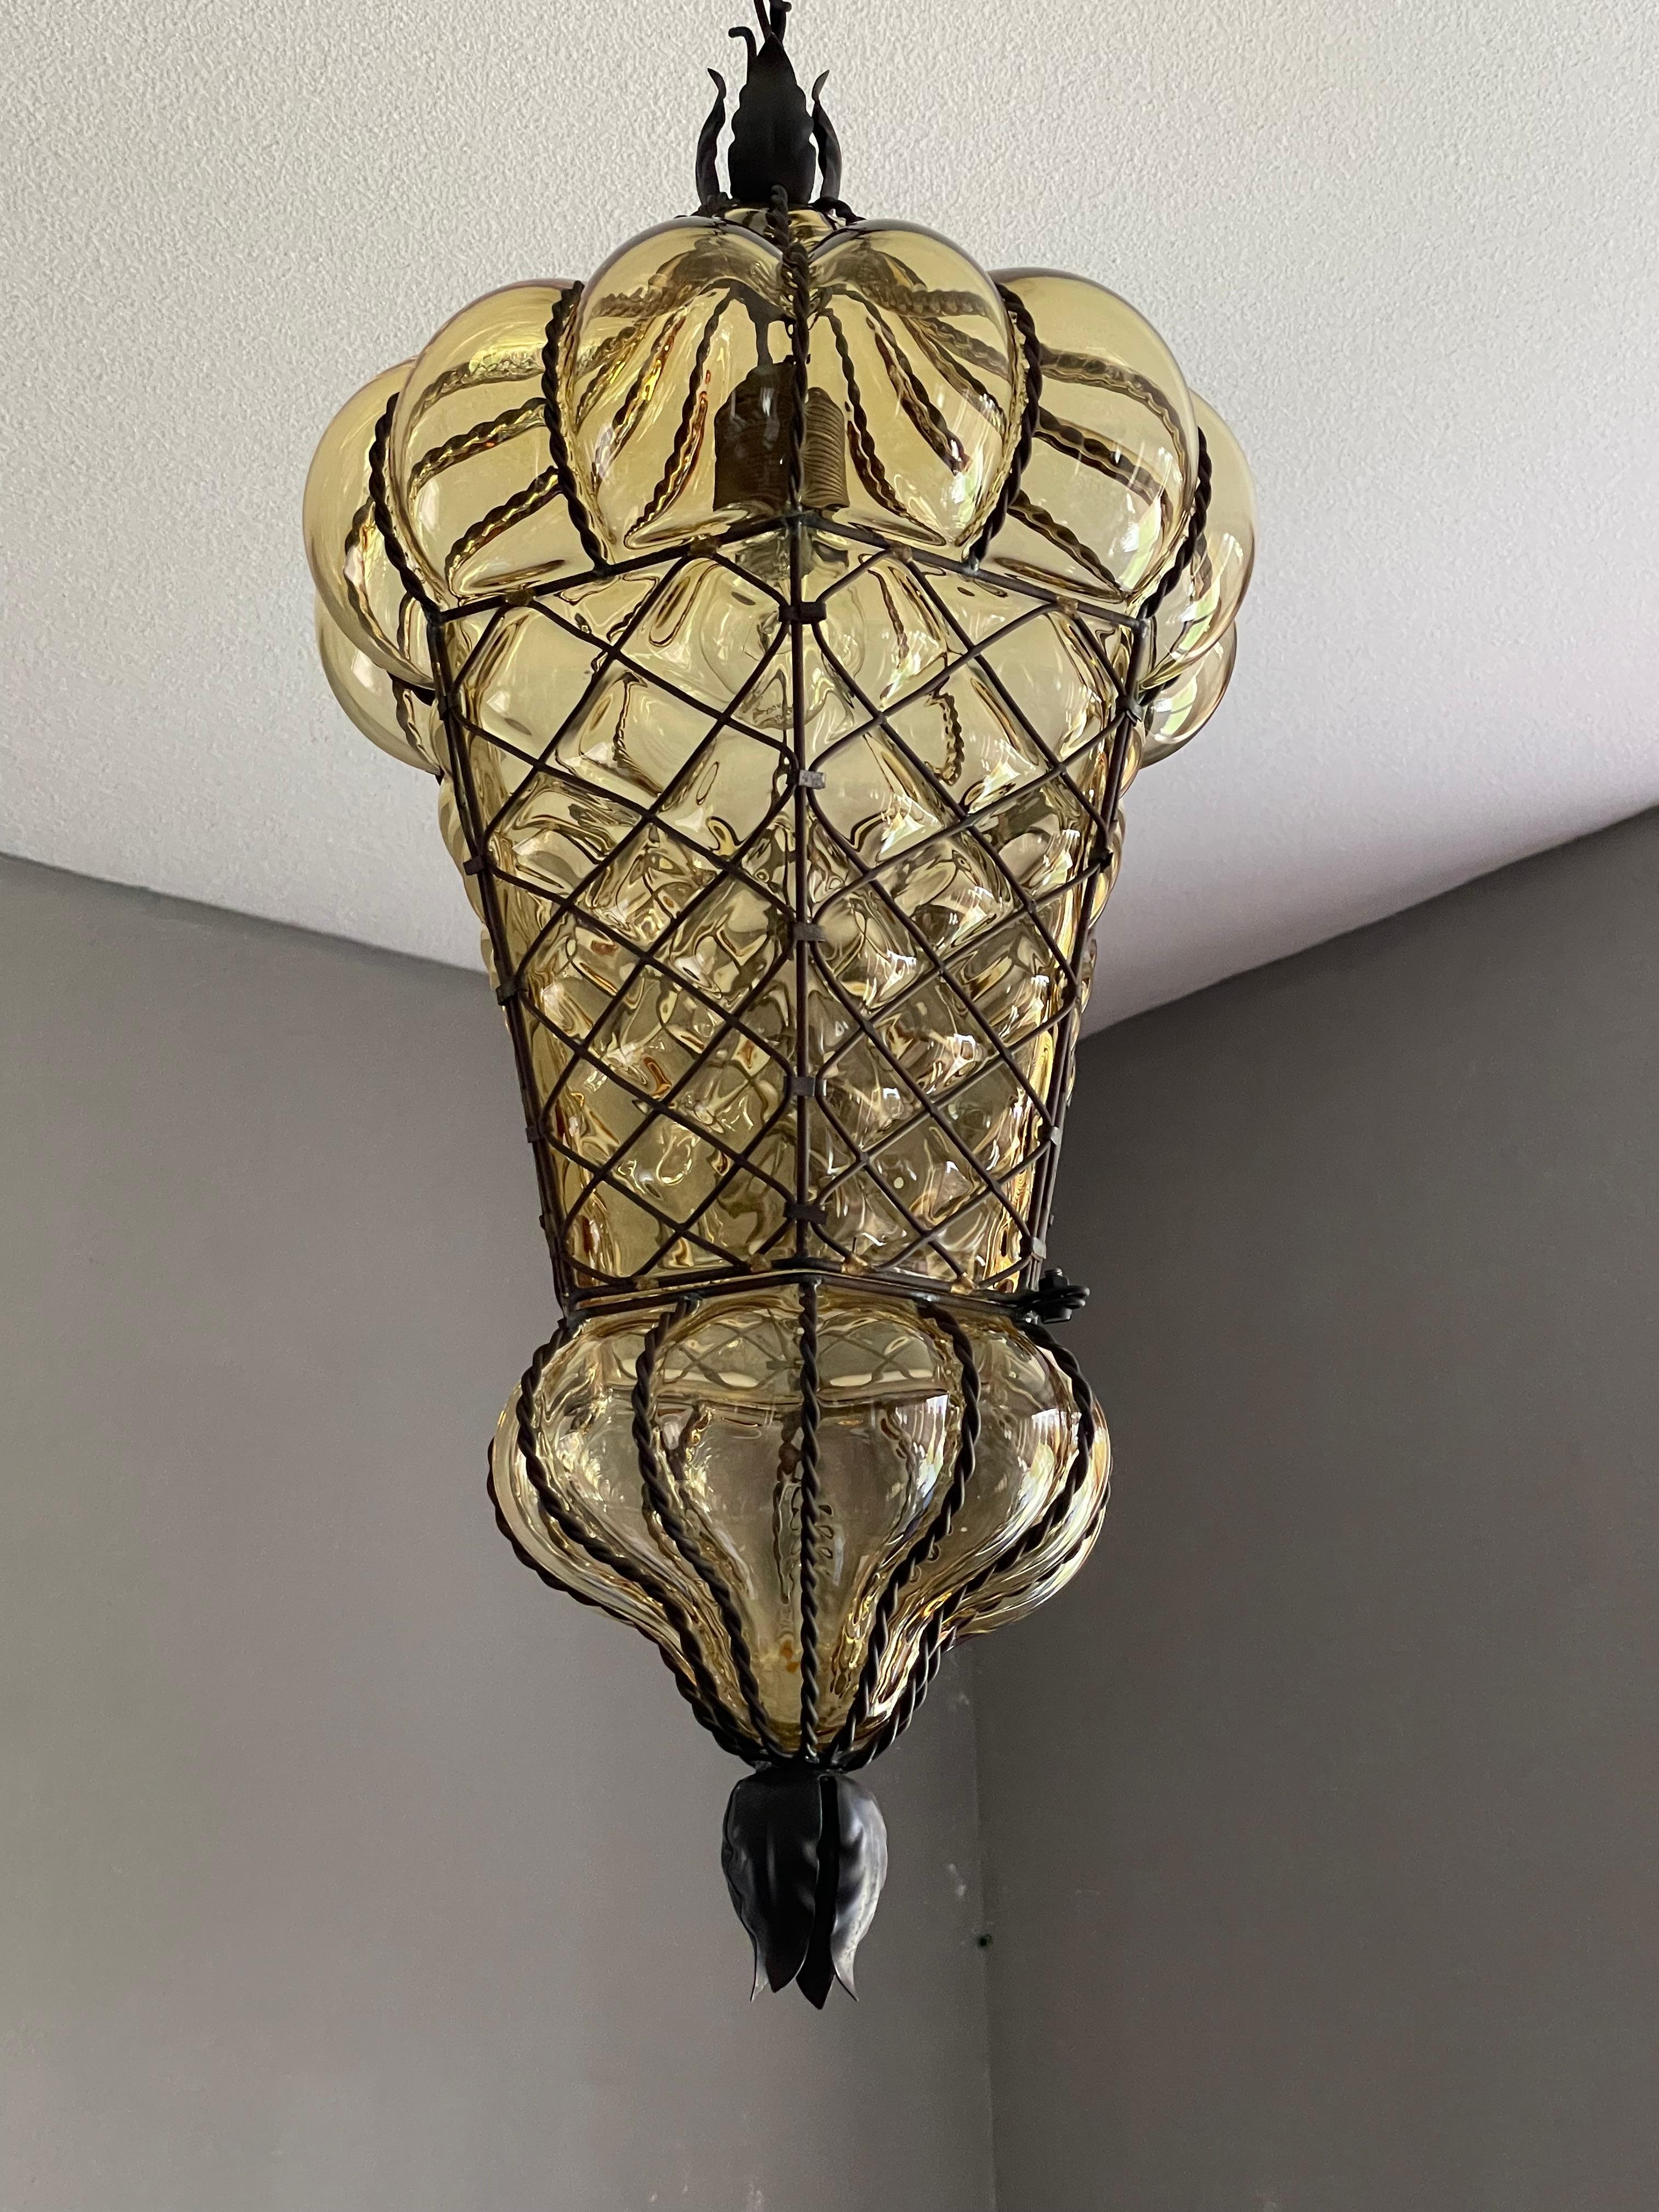 Large, amber colored and great condition Venetian Murano light fixture.

This antique Venetian pendant is not only one of the largest of its kind that we ever had the pleasure of offering, it also is in exceptional condition. We have completely